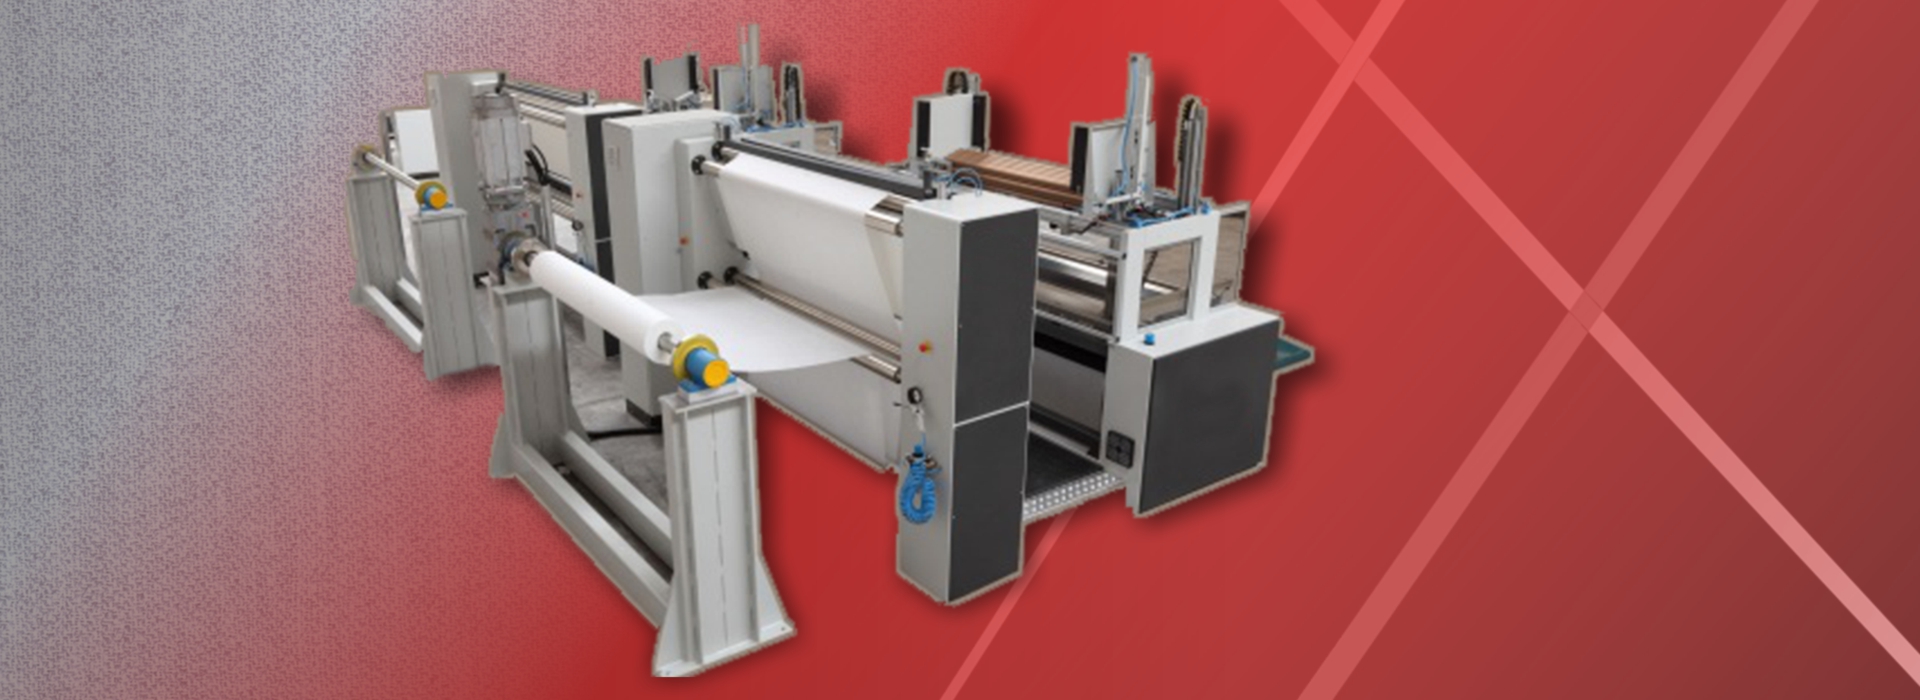 macchine linee automazioni e imballo – machines for automation and packaging lines